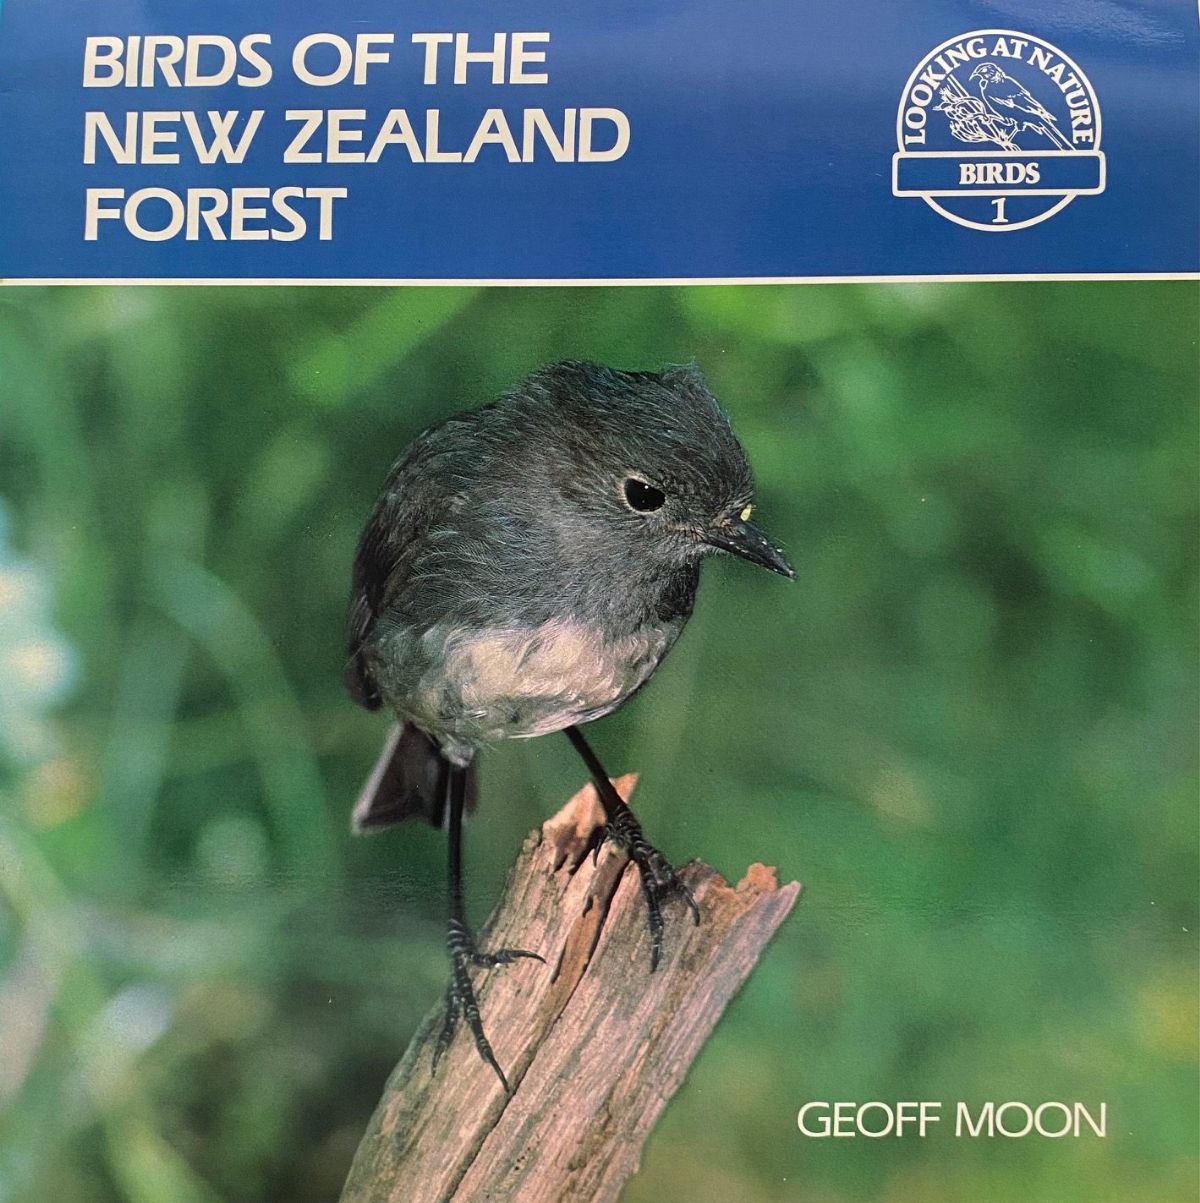 BIRDS OF THE NEW ZEALAND FOREST